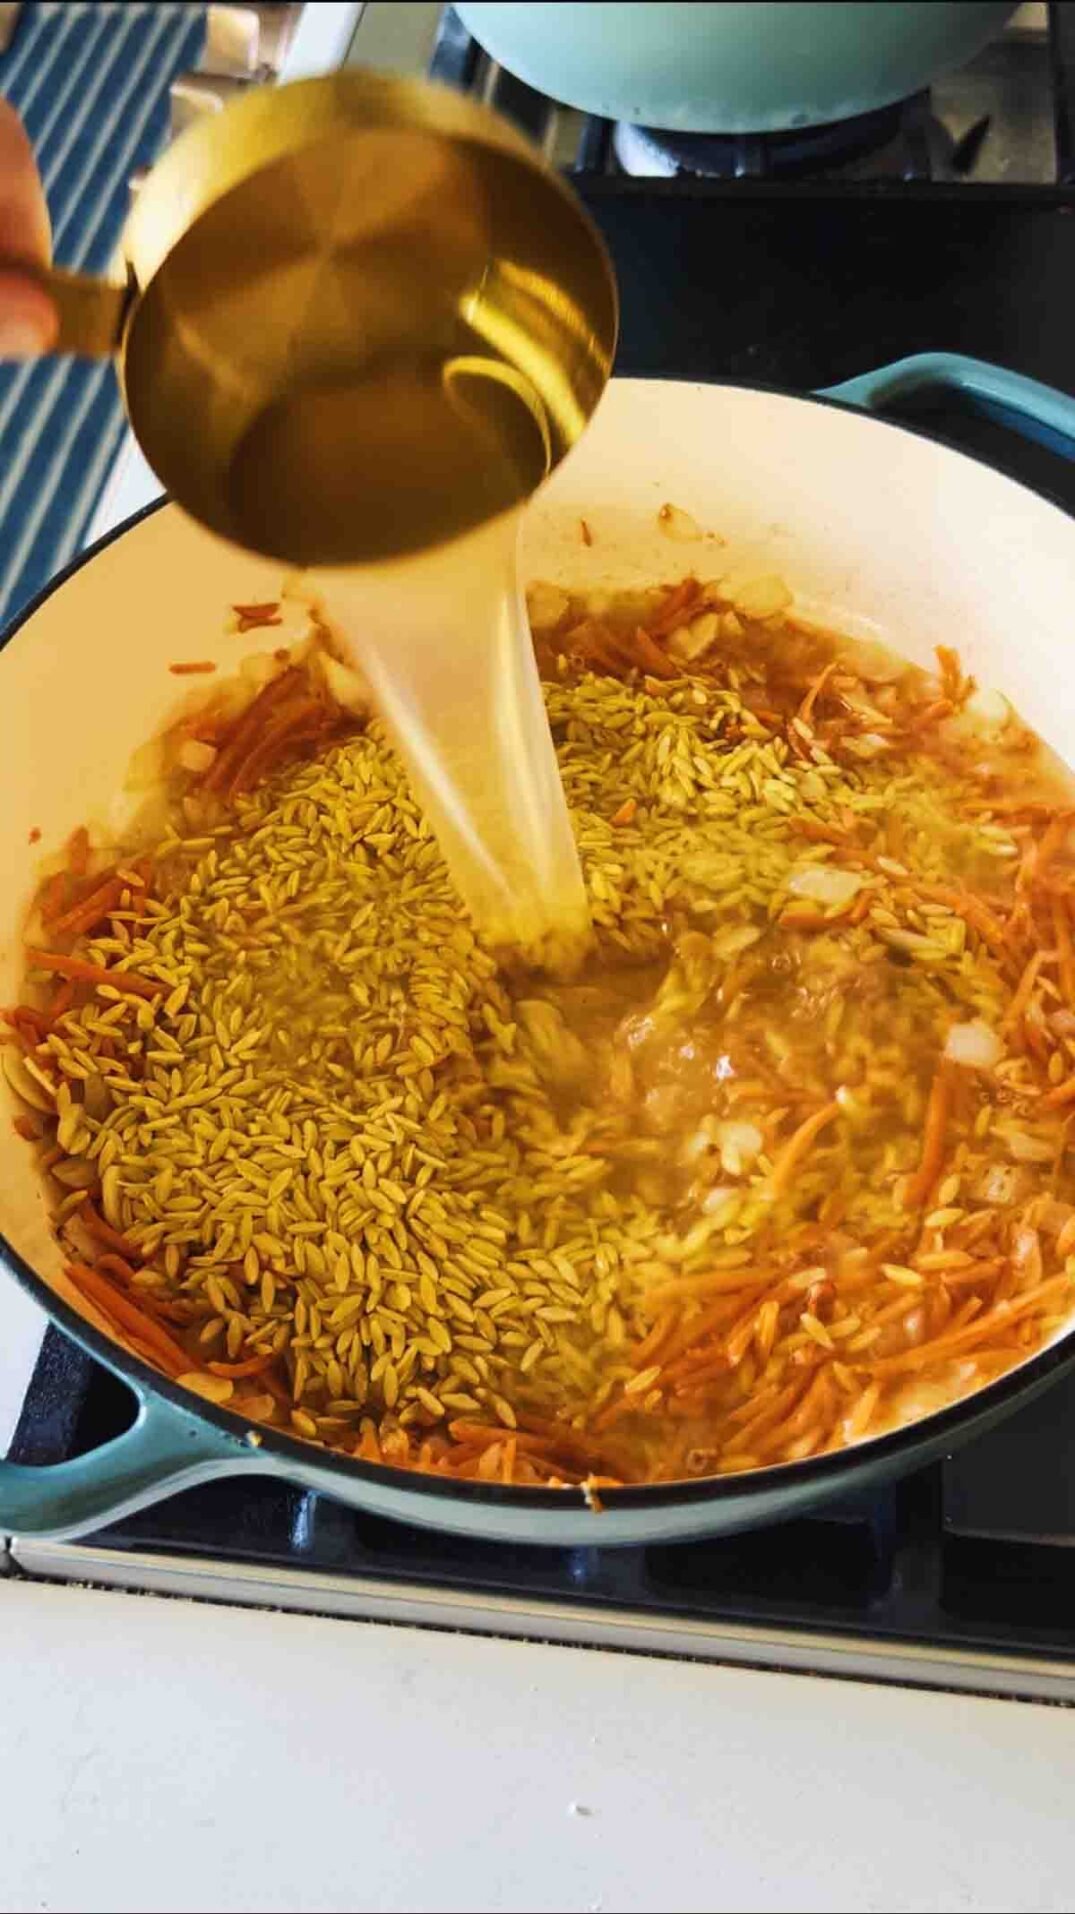 chicken stock being poured into orzo in a blue braising dish on the stovetop.